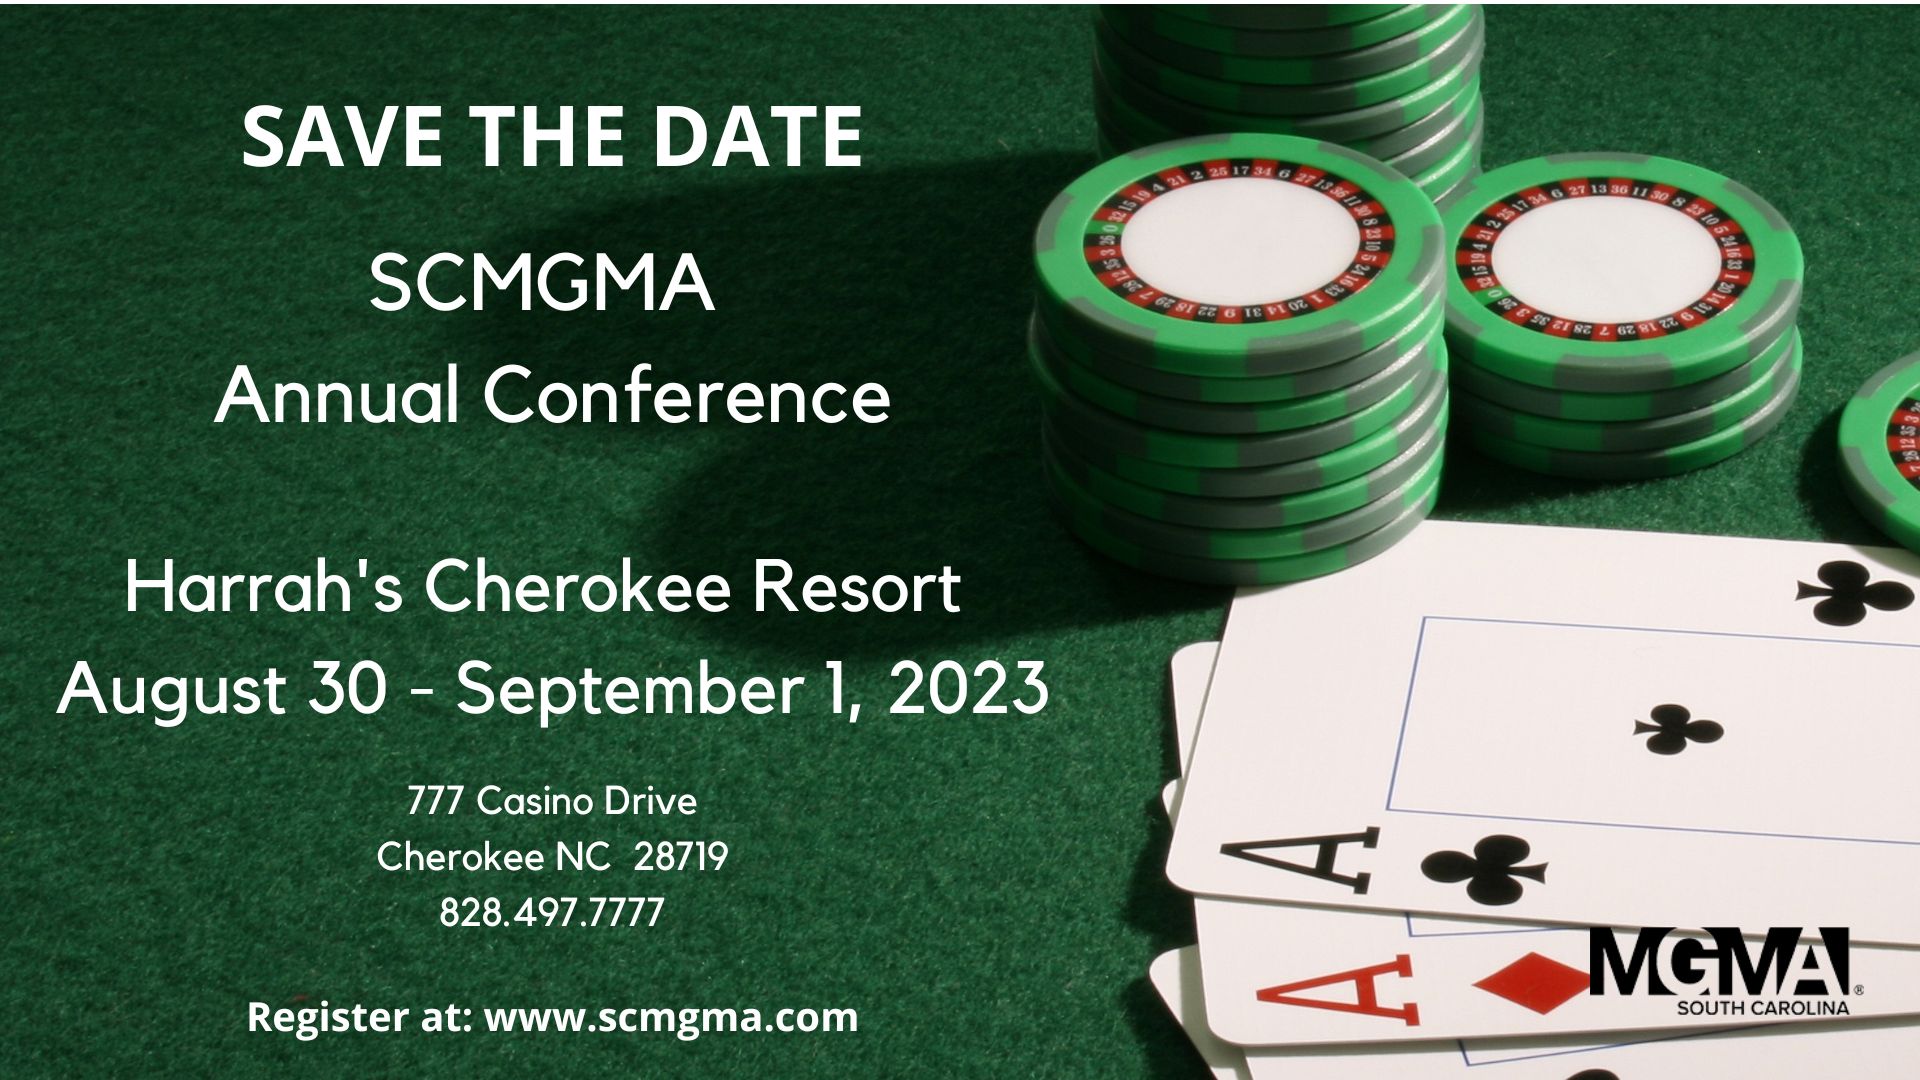 Save The Date SCMGMA 2023 Conference